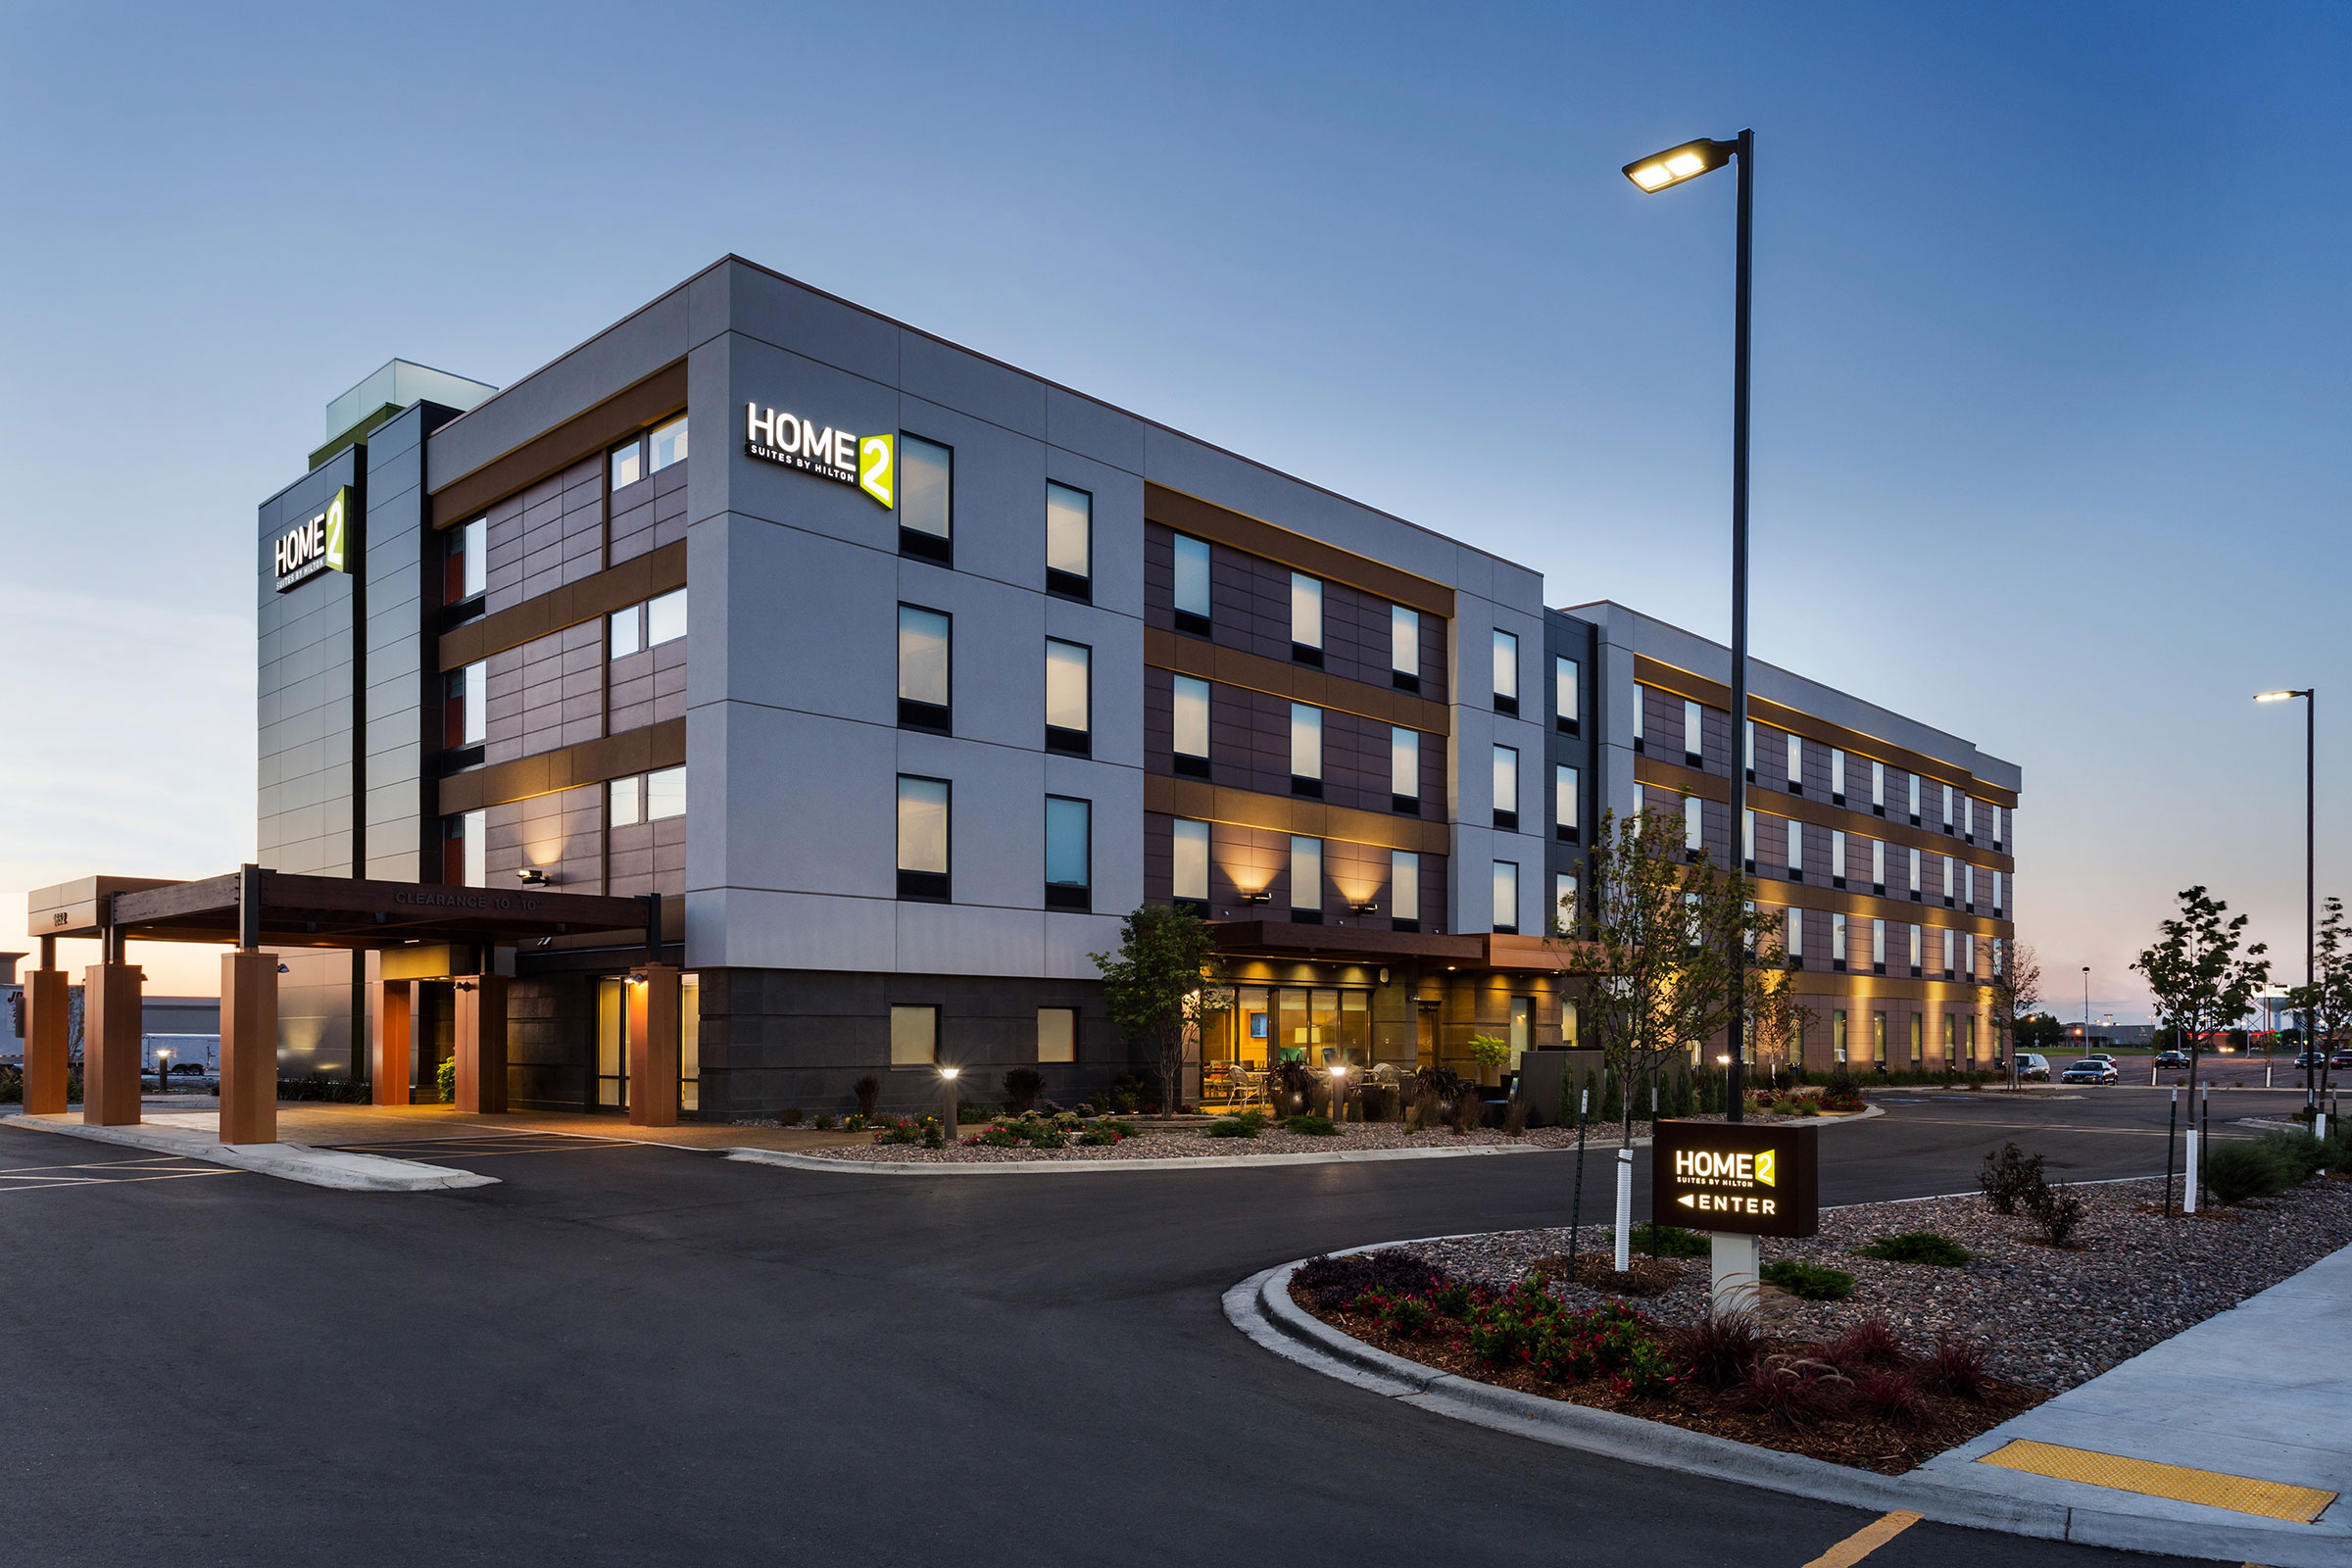 Home2 Suites     Fargo  GBA Architecture and Design